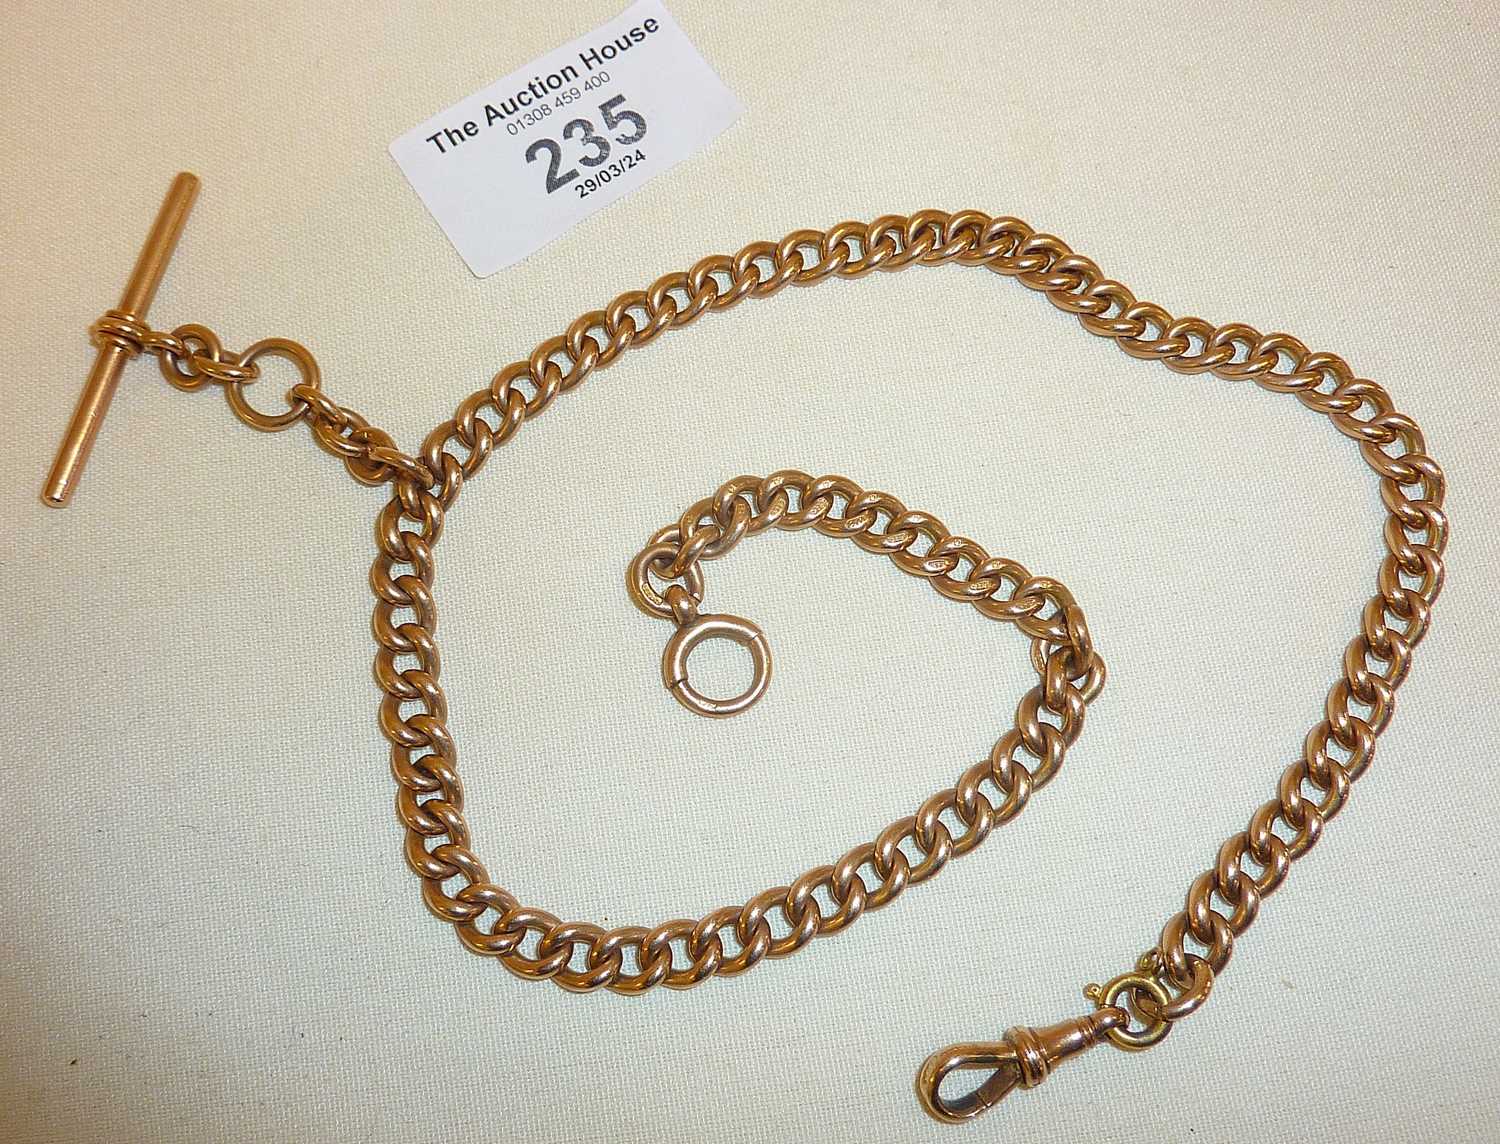 9ct rose gold albert watch chain with t-bar and dog clip. Each link marked as 375, approx. 41cm long - Image 2 of 2